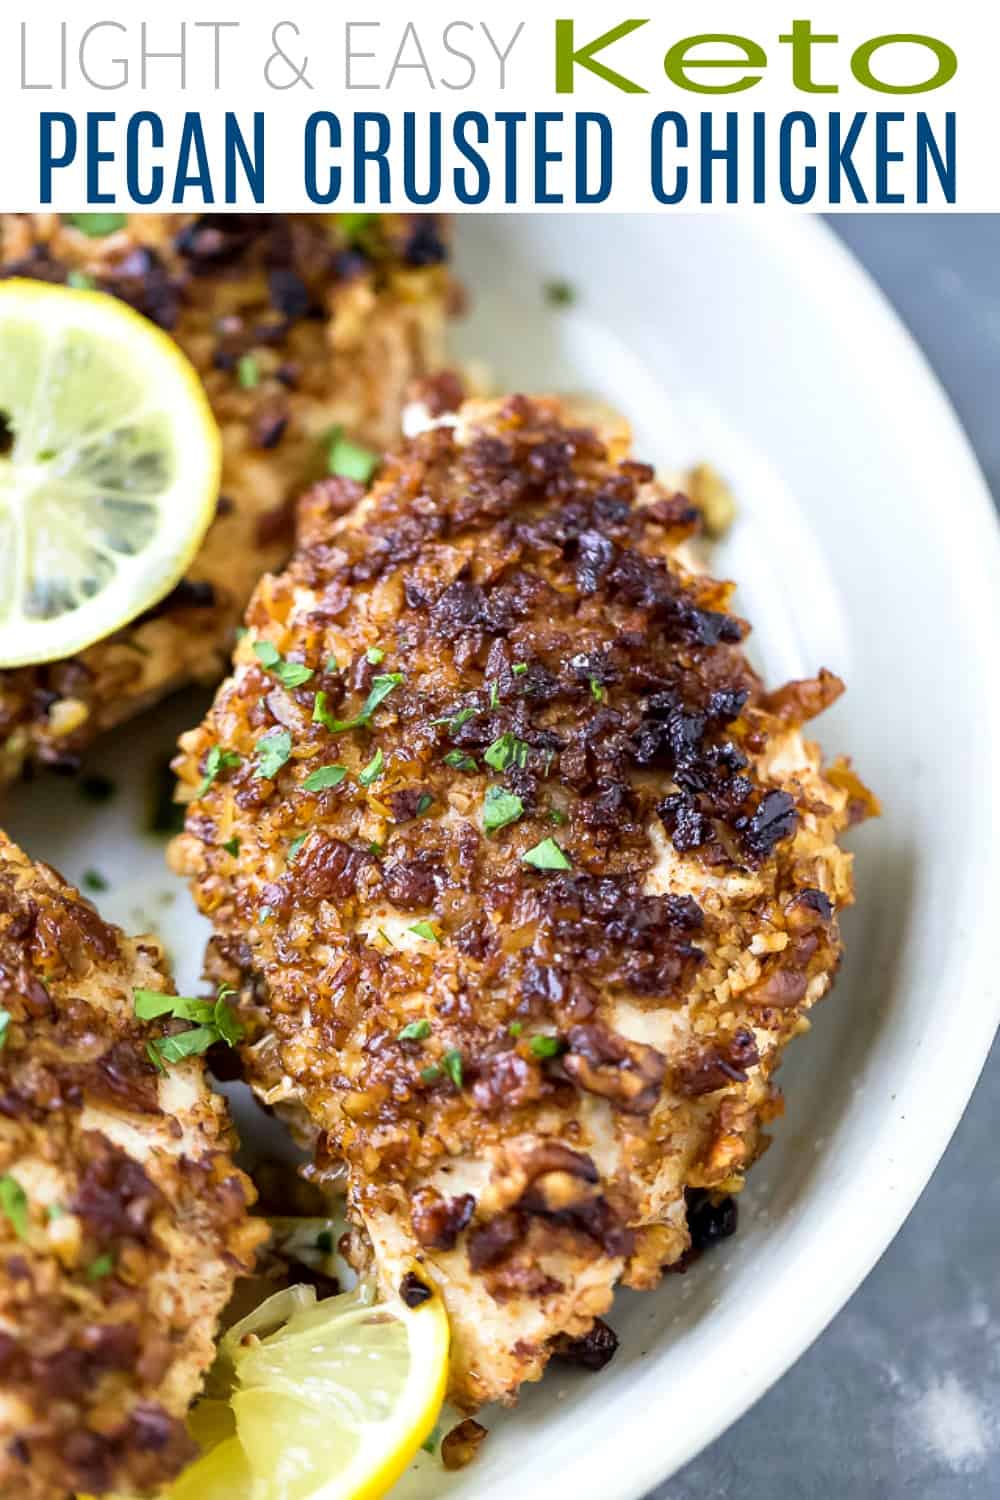 pinterest image for light and easy keto pecan crusted chicken recipe